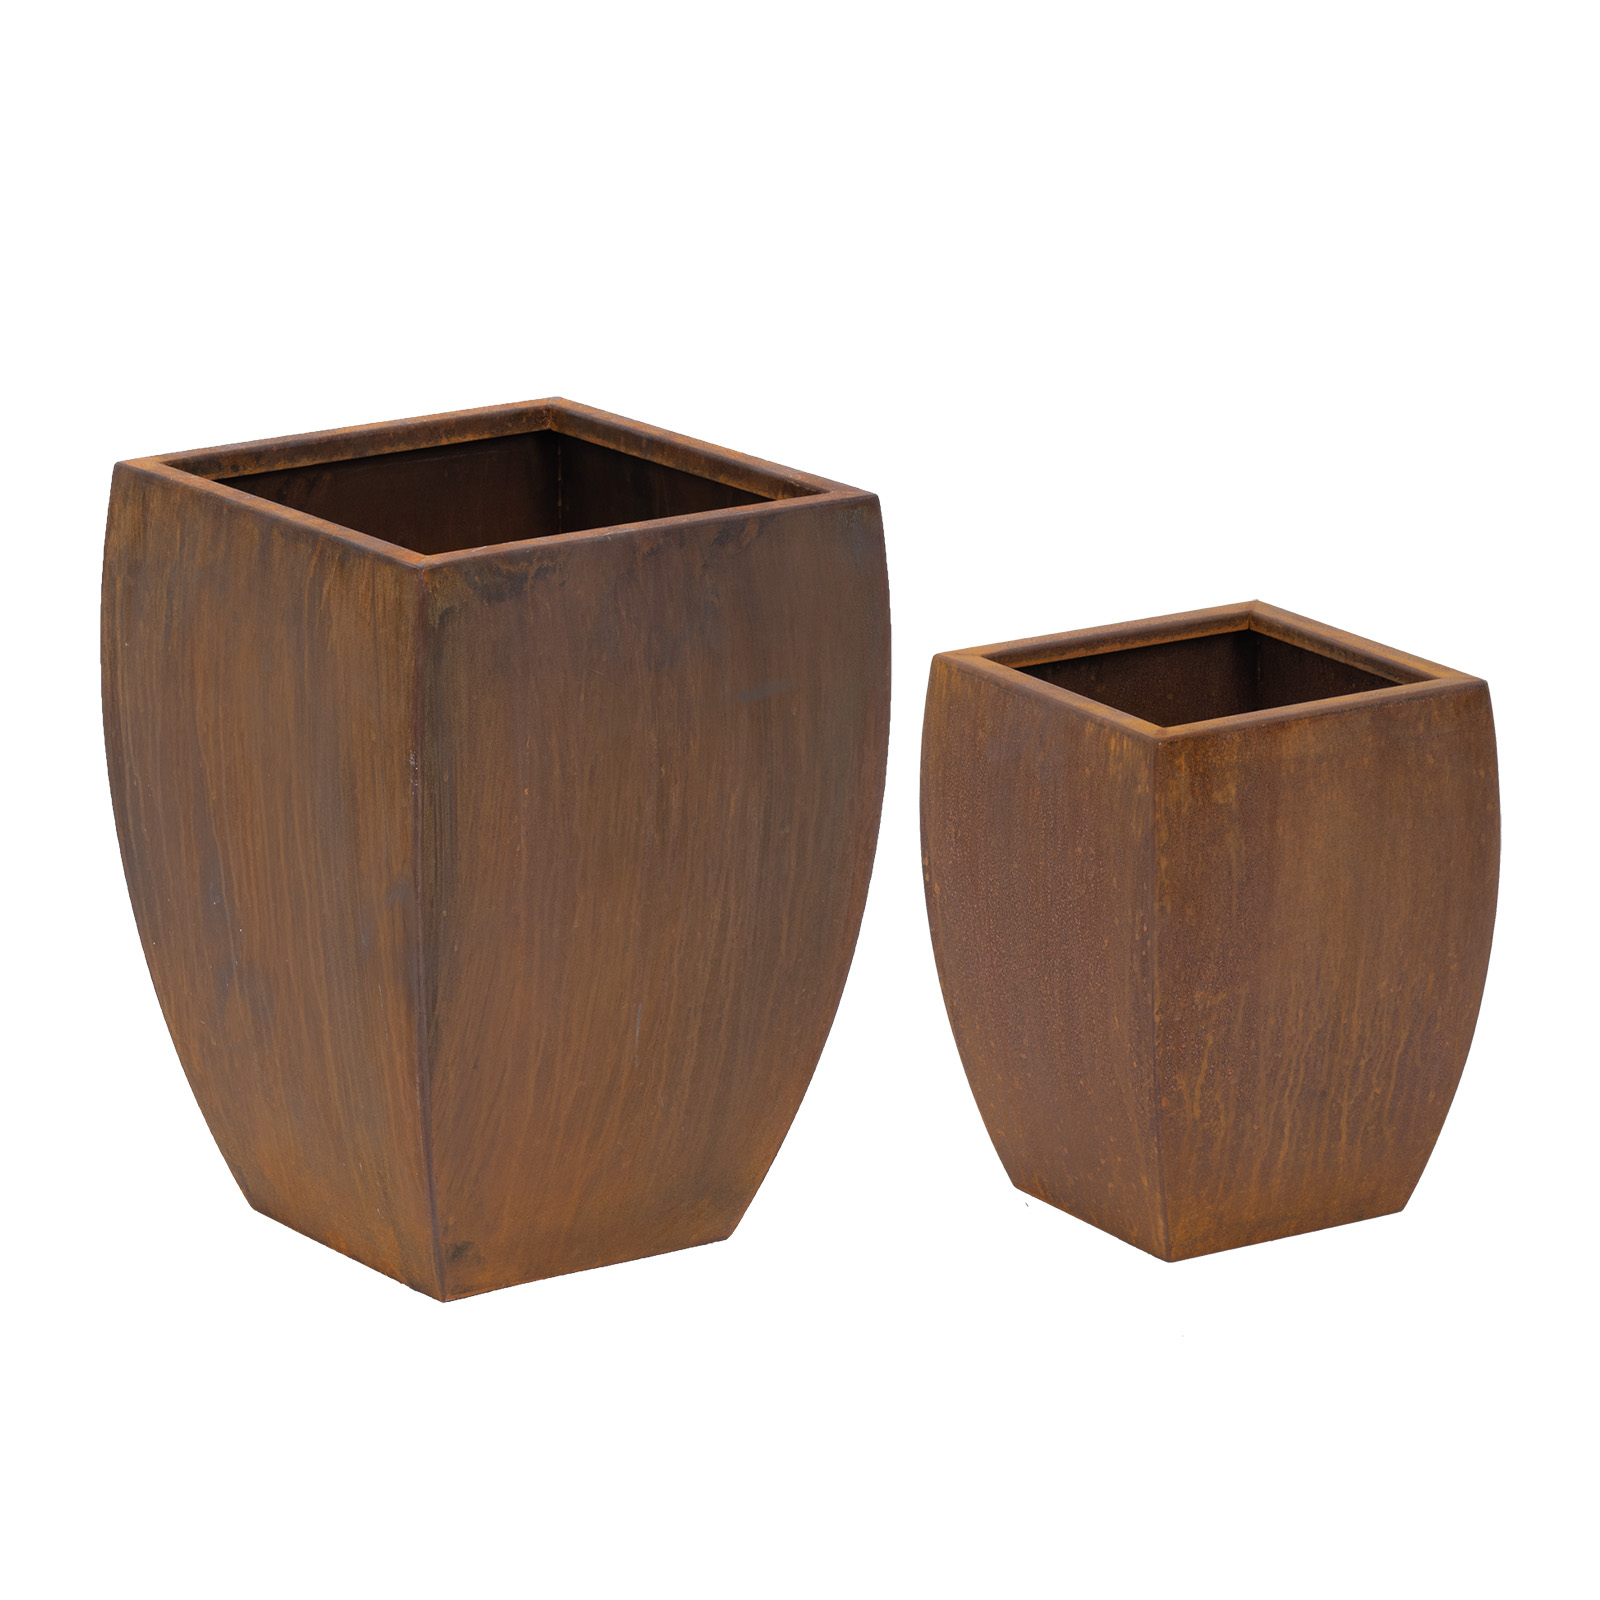 Planter Pot - Set of 2 - Corten steel - conical / rounded - rust red - Royal Catering